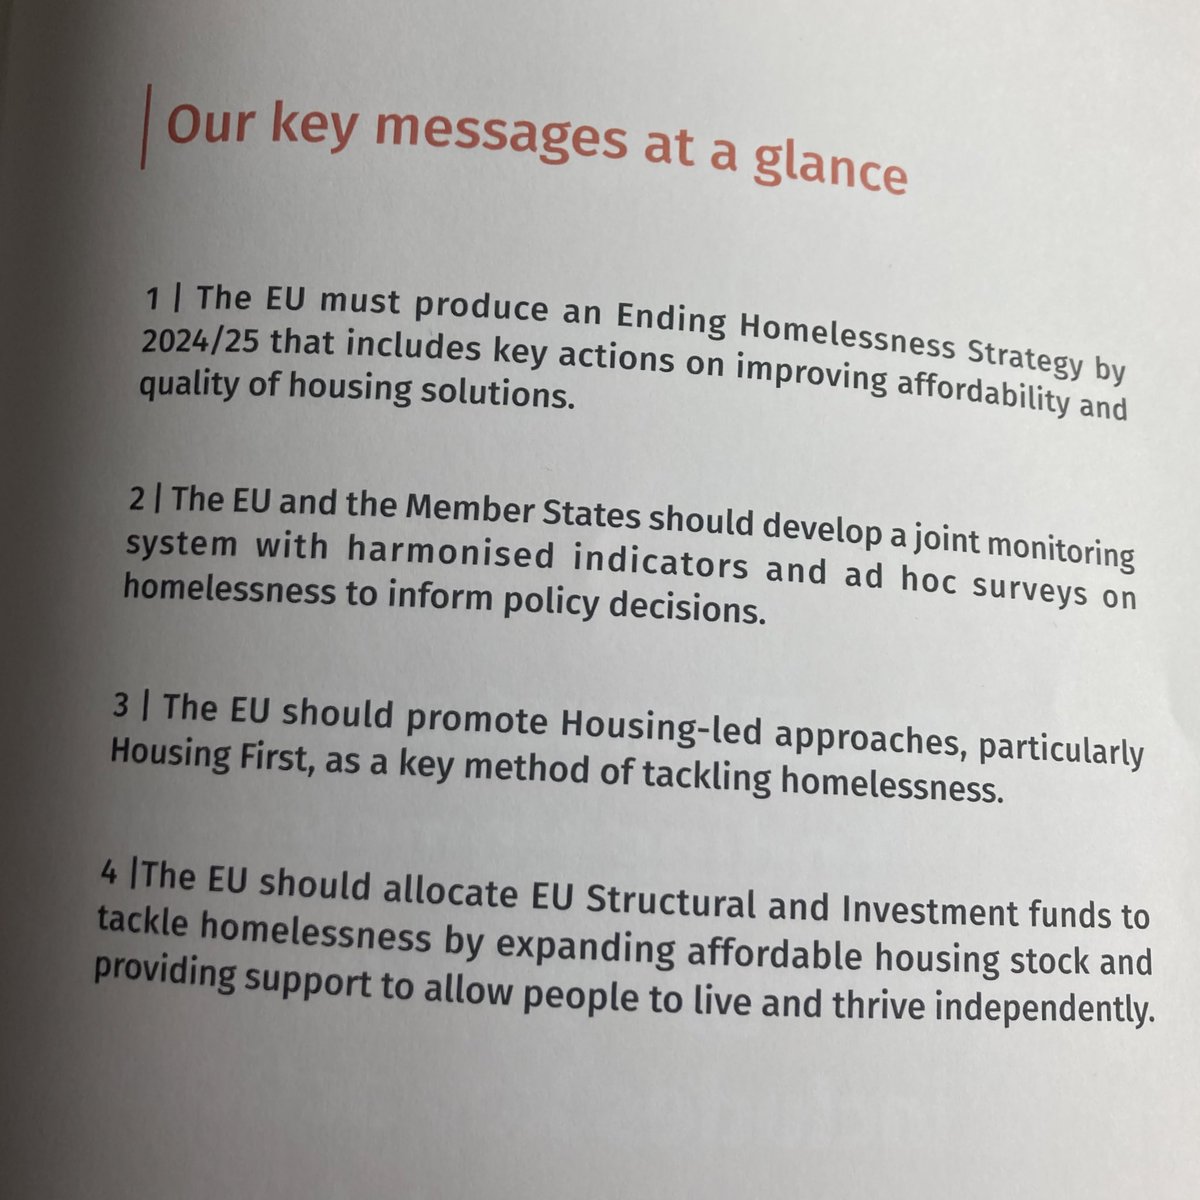 Key messages  @URBACTROOF project to EU (Commission) presented 2day in Ghent: 

➡️ proper EU strategy on homelessness

➡️ EU data collection on homelessness

➡️promote Housing First

➡️ensure access to EU funding & financing to tackle homelessness

Timely demands!

#ROOFTOPEU2022